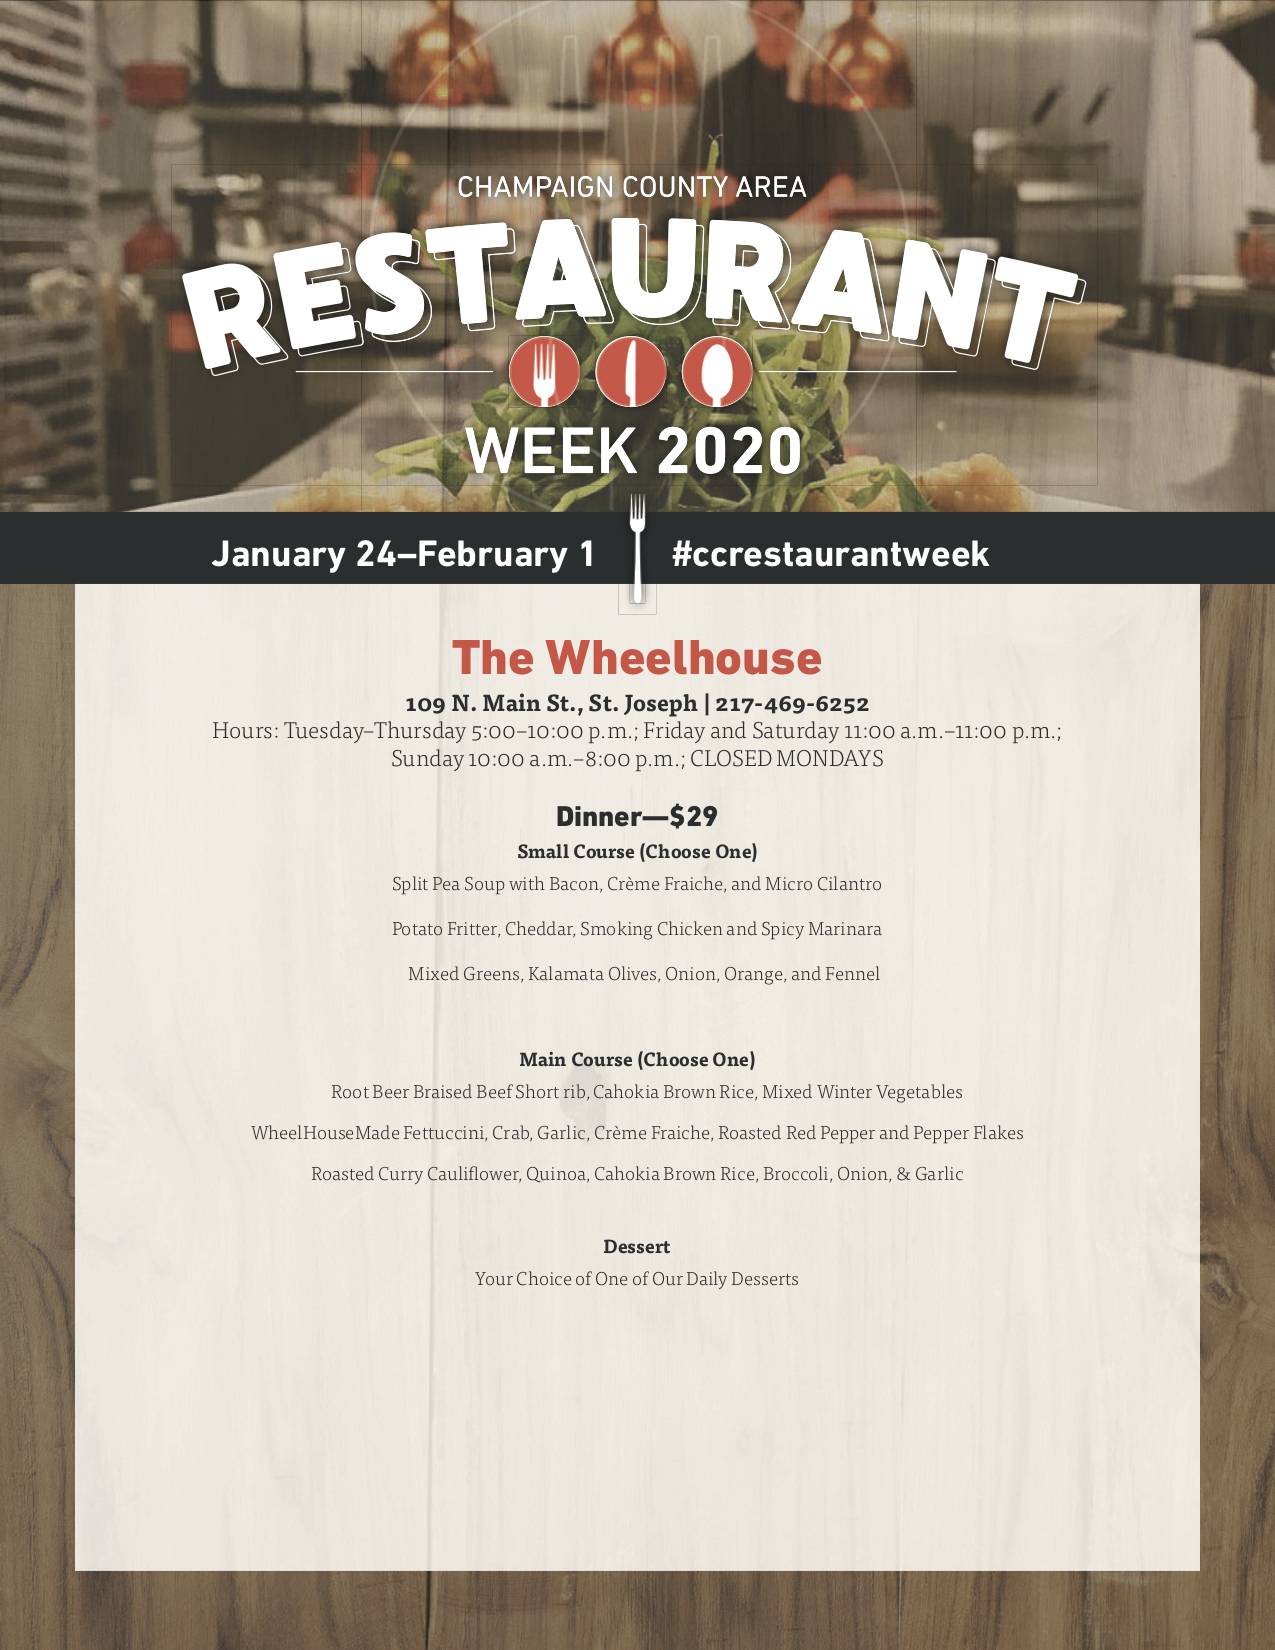 Image: A poster that says Champaign County Area Restaurant Week 2020 at the top. The remainder details the available menu options at the WheelHouse during Restaurant Week. Image from Visit Champaign County.